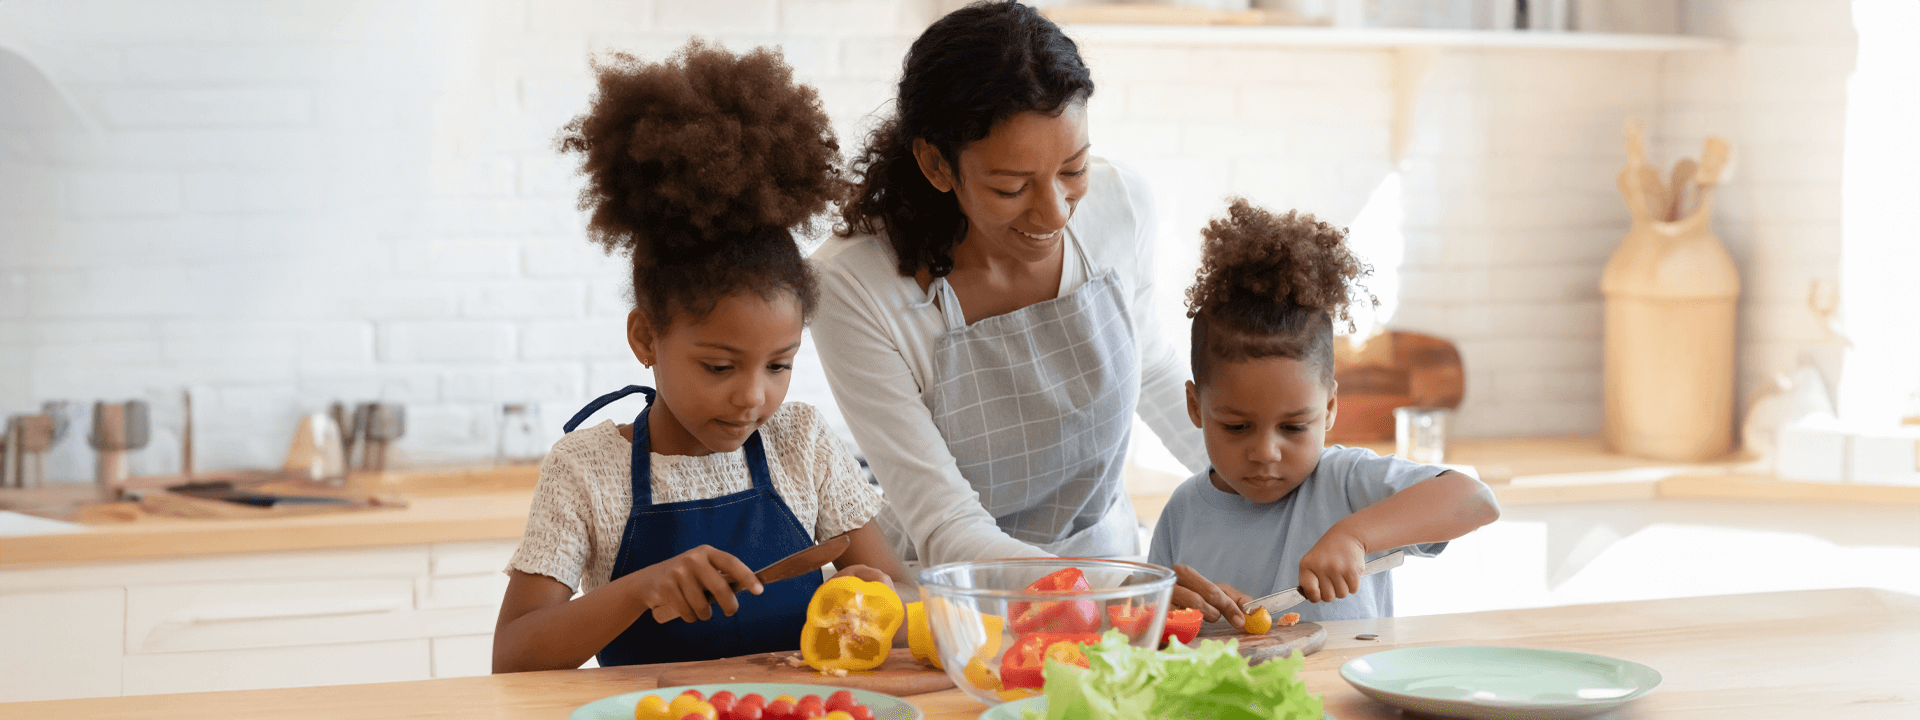 Top 10 Tips to Get Your Children to Eat More Vegetables